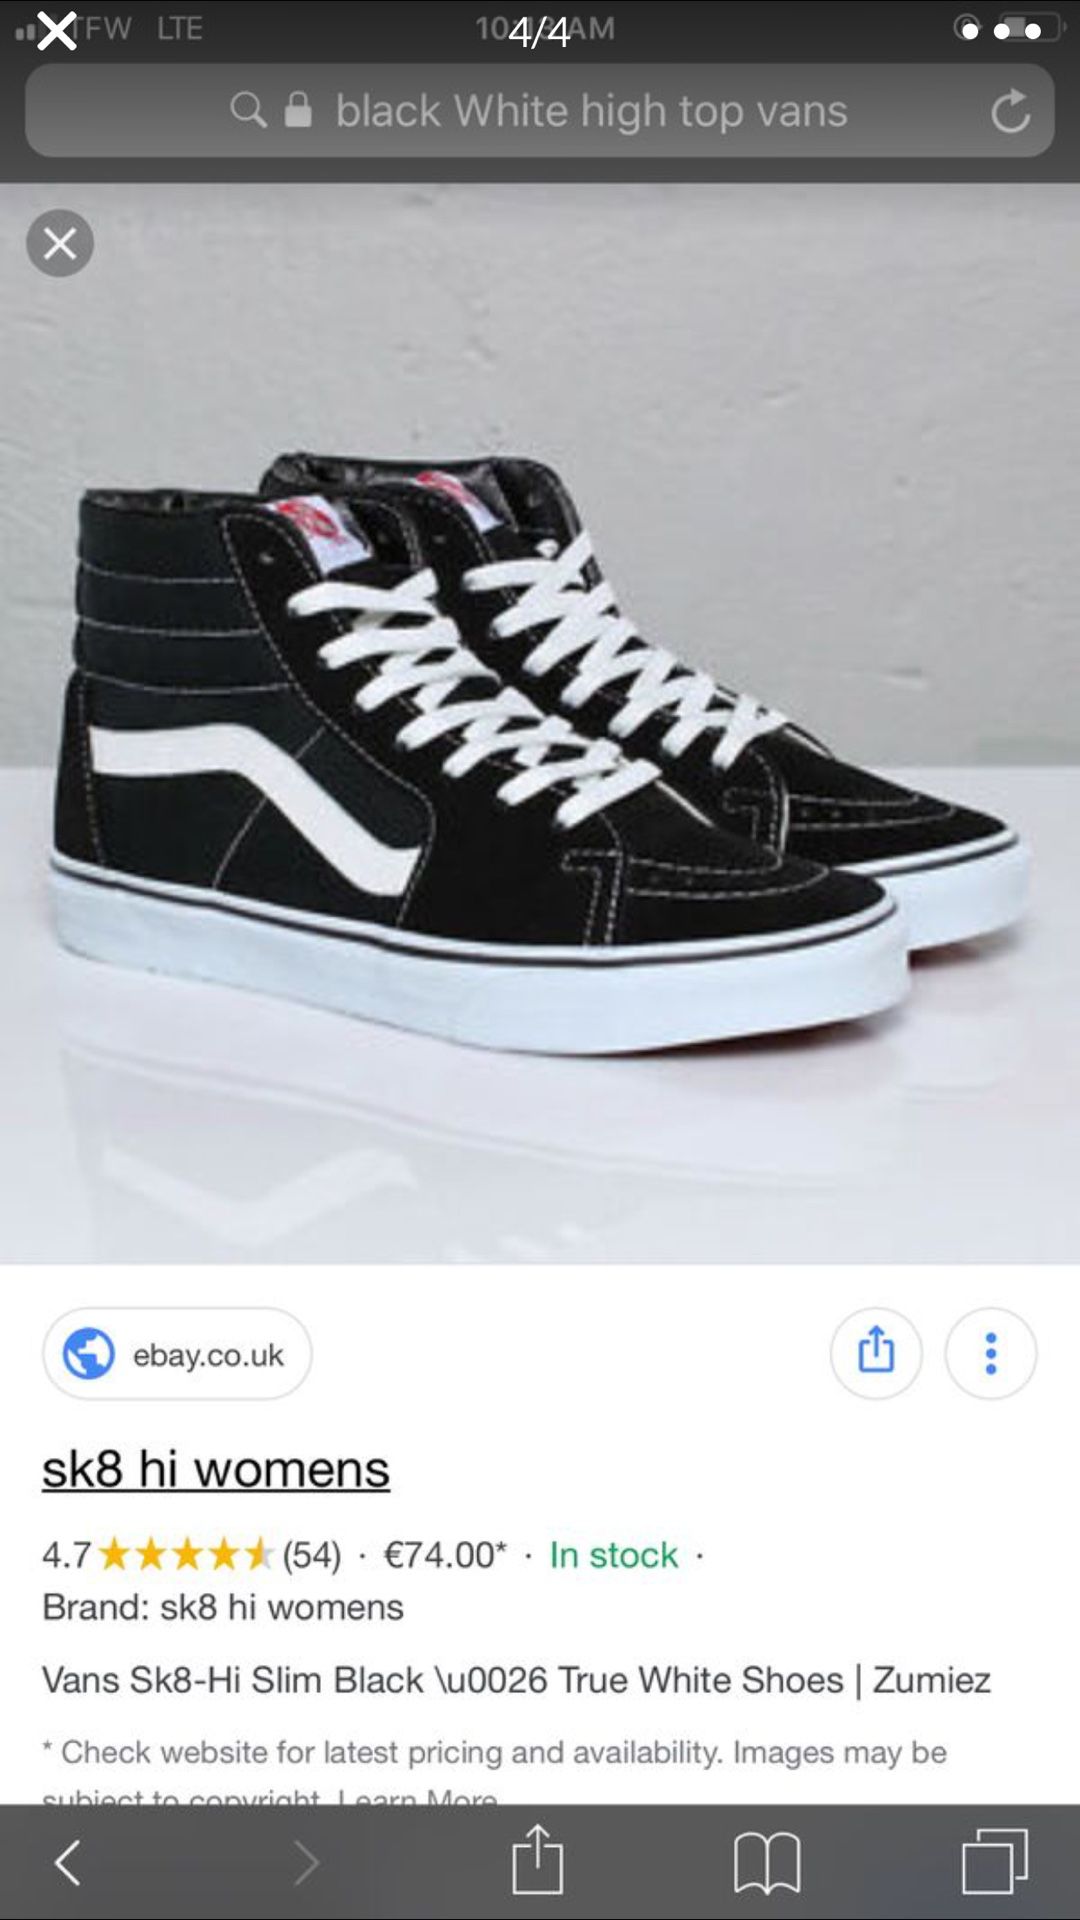 Vans size 6 and men 7 1/2 in women can’t wait to pairs of shoestrings great price